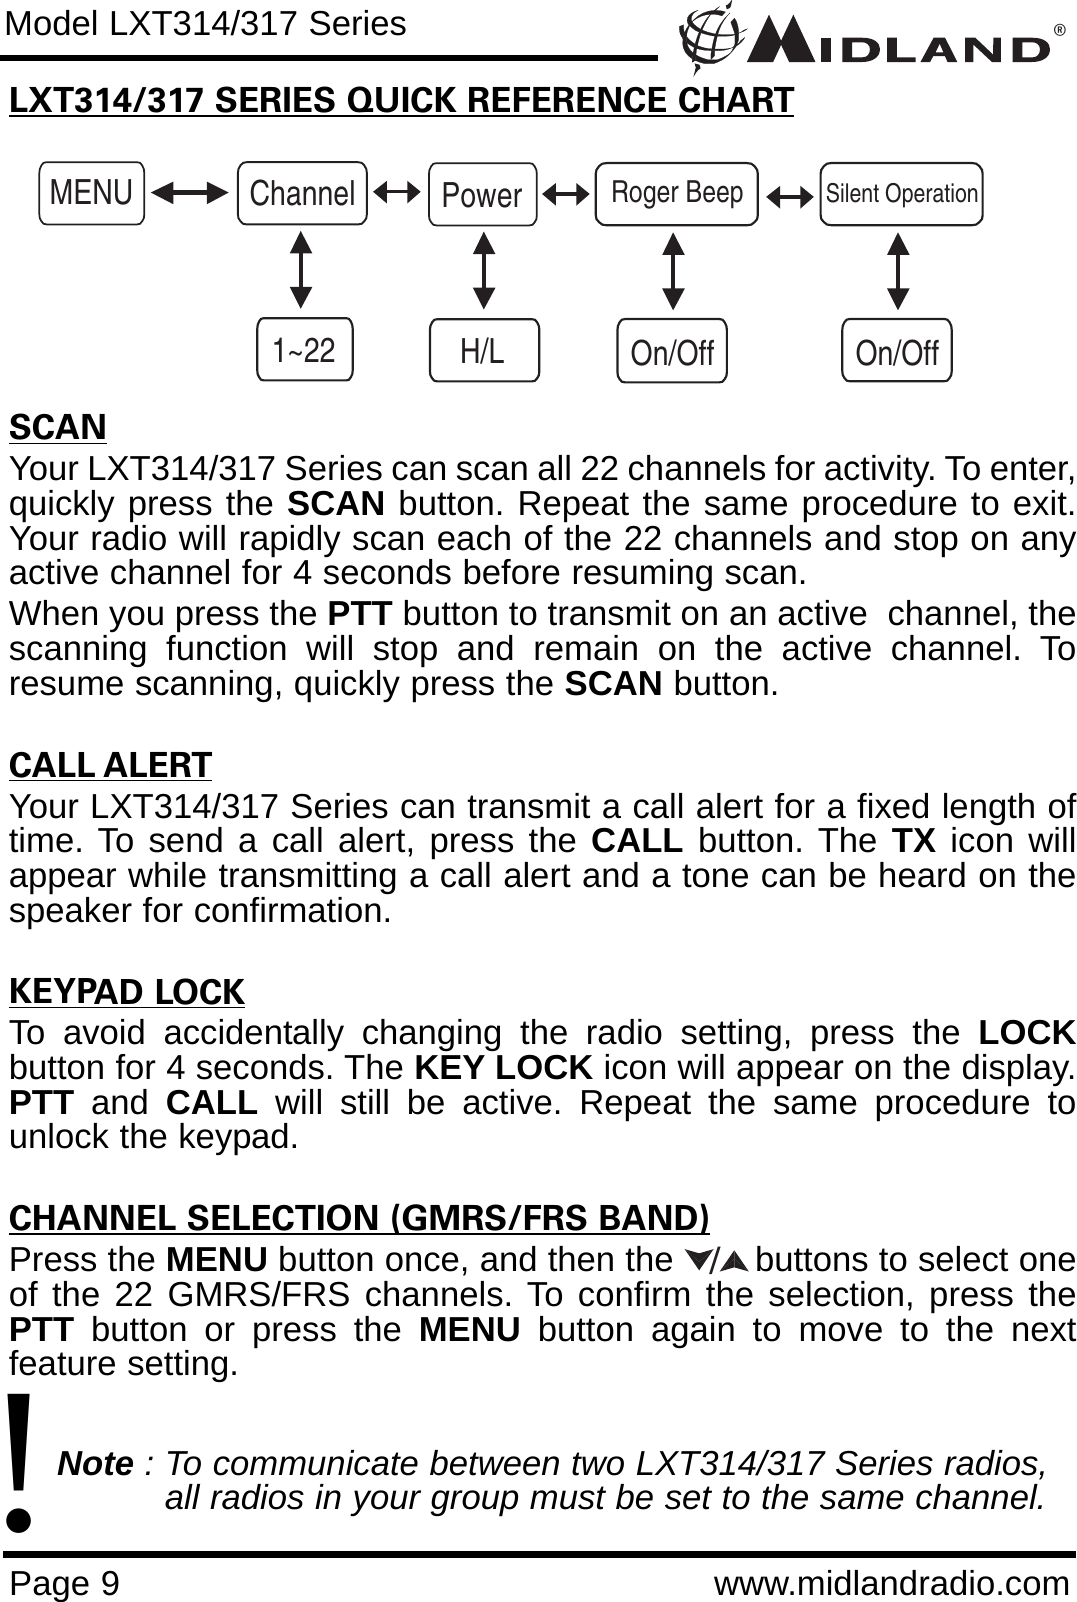 ®Page 9 www.midlandradio.comLXT314/317 SERIES QUICK REFERENCE CHARTSCANYour LXT314/317 Series can scan all 22 channels for activity. To enter,quickly press the SCAN button. Repeat the same procedure to exit.Your radio will rapidly scan each of the 22 channels and stop on anyactive channel for 4 seconds before resuming scan.When you press the PTT button to transmit on an active  channel, thescanning function will stop and remain on the active channel. Toresume scanning, quickly press the SCAN button.CALL ALERTYour LXT314/317 Series can transmit a call alert for a fixed length oftime. To send a call alert, press the CALL button. The TX icon willappear while transmitting a call alert and a tone can be heard on thespeaker for confirmation. KEYPAD LOCKTo avoid accidentally changing the radio setting, press the LOCKbutton for 4 seconds. The KEY LOCK icon will appear on the display.PTT and  CALL will still be active. Repeat the same procedure tounlock the keypad.CHANNEL SELECTION (GMRS/FRS BAND)Press the MENU button once, and then the        buttons to select oneof the 22 GMRS/FRS channels. To confirm the selection, press thePTT button or press the MENU button again to move to the nextfeature setting.Note : To communicate between two LXT314/317 Series radios,  all radios in your group must be set to the same channel.Model LXT314/317 SeriesMENU Channel1~22Roger BeepOn/OffPowerH/LSilent OperationOn/Off!/